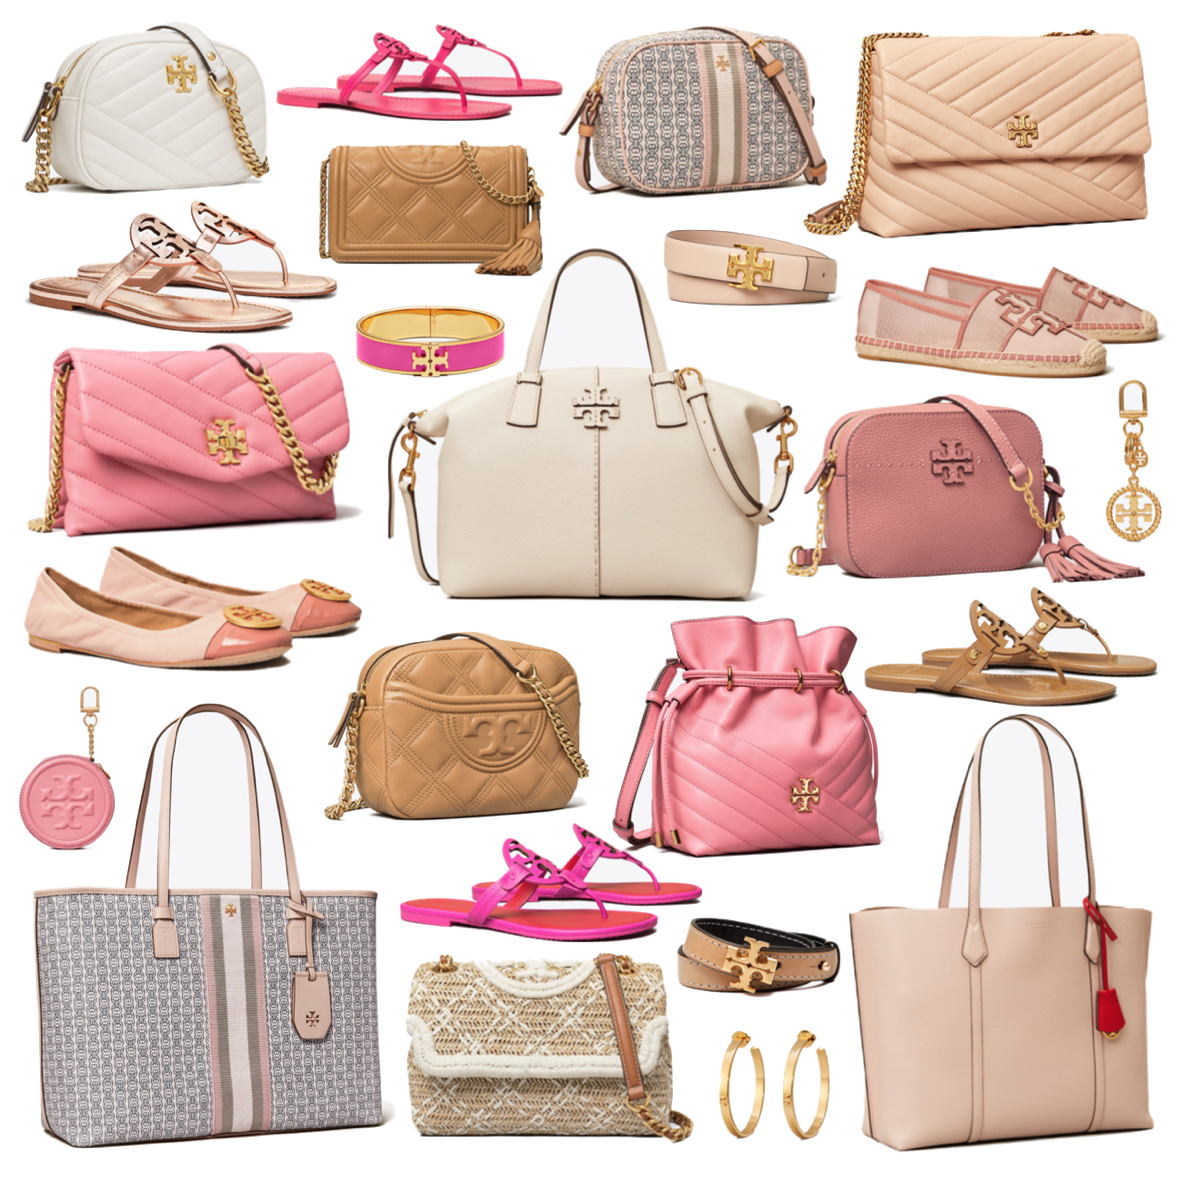 Tory Burch sale: Save up to 30% on purses, shoes and clothing